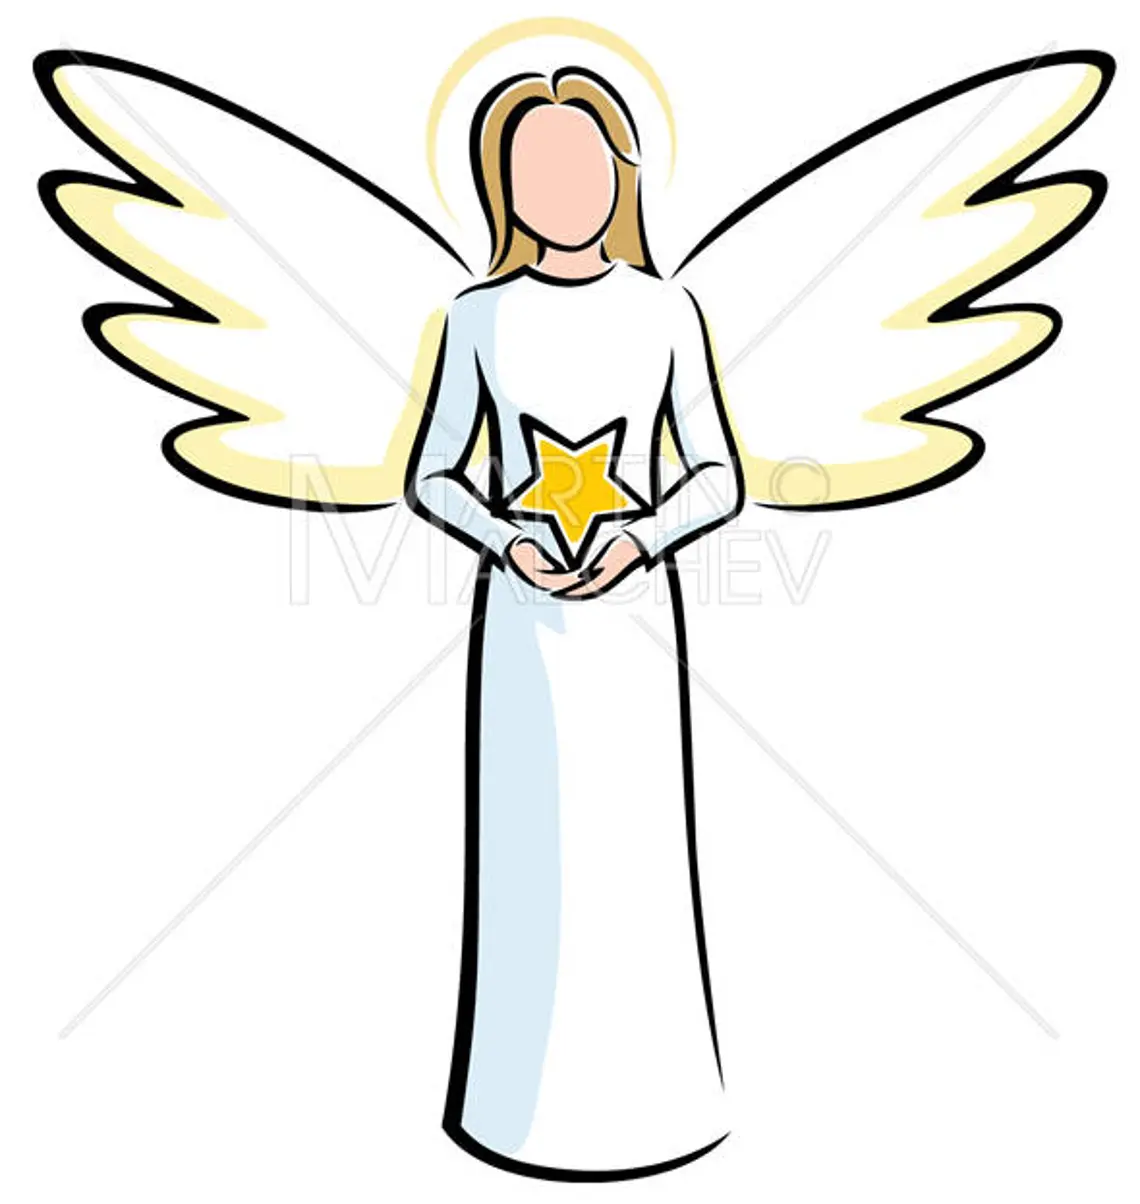 The image of an angel with a star in his hands.